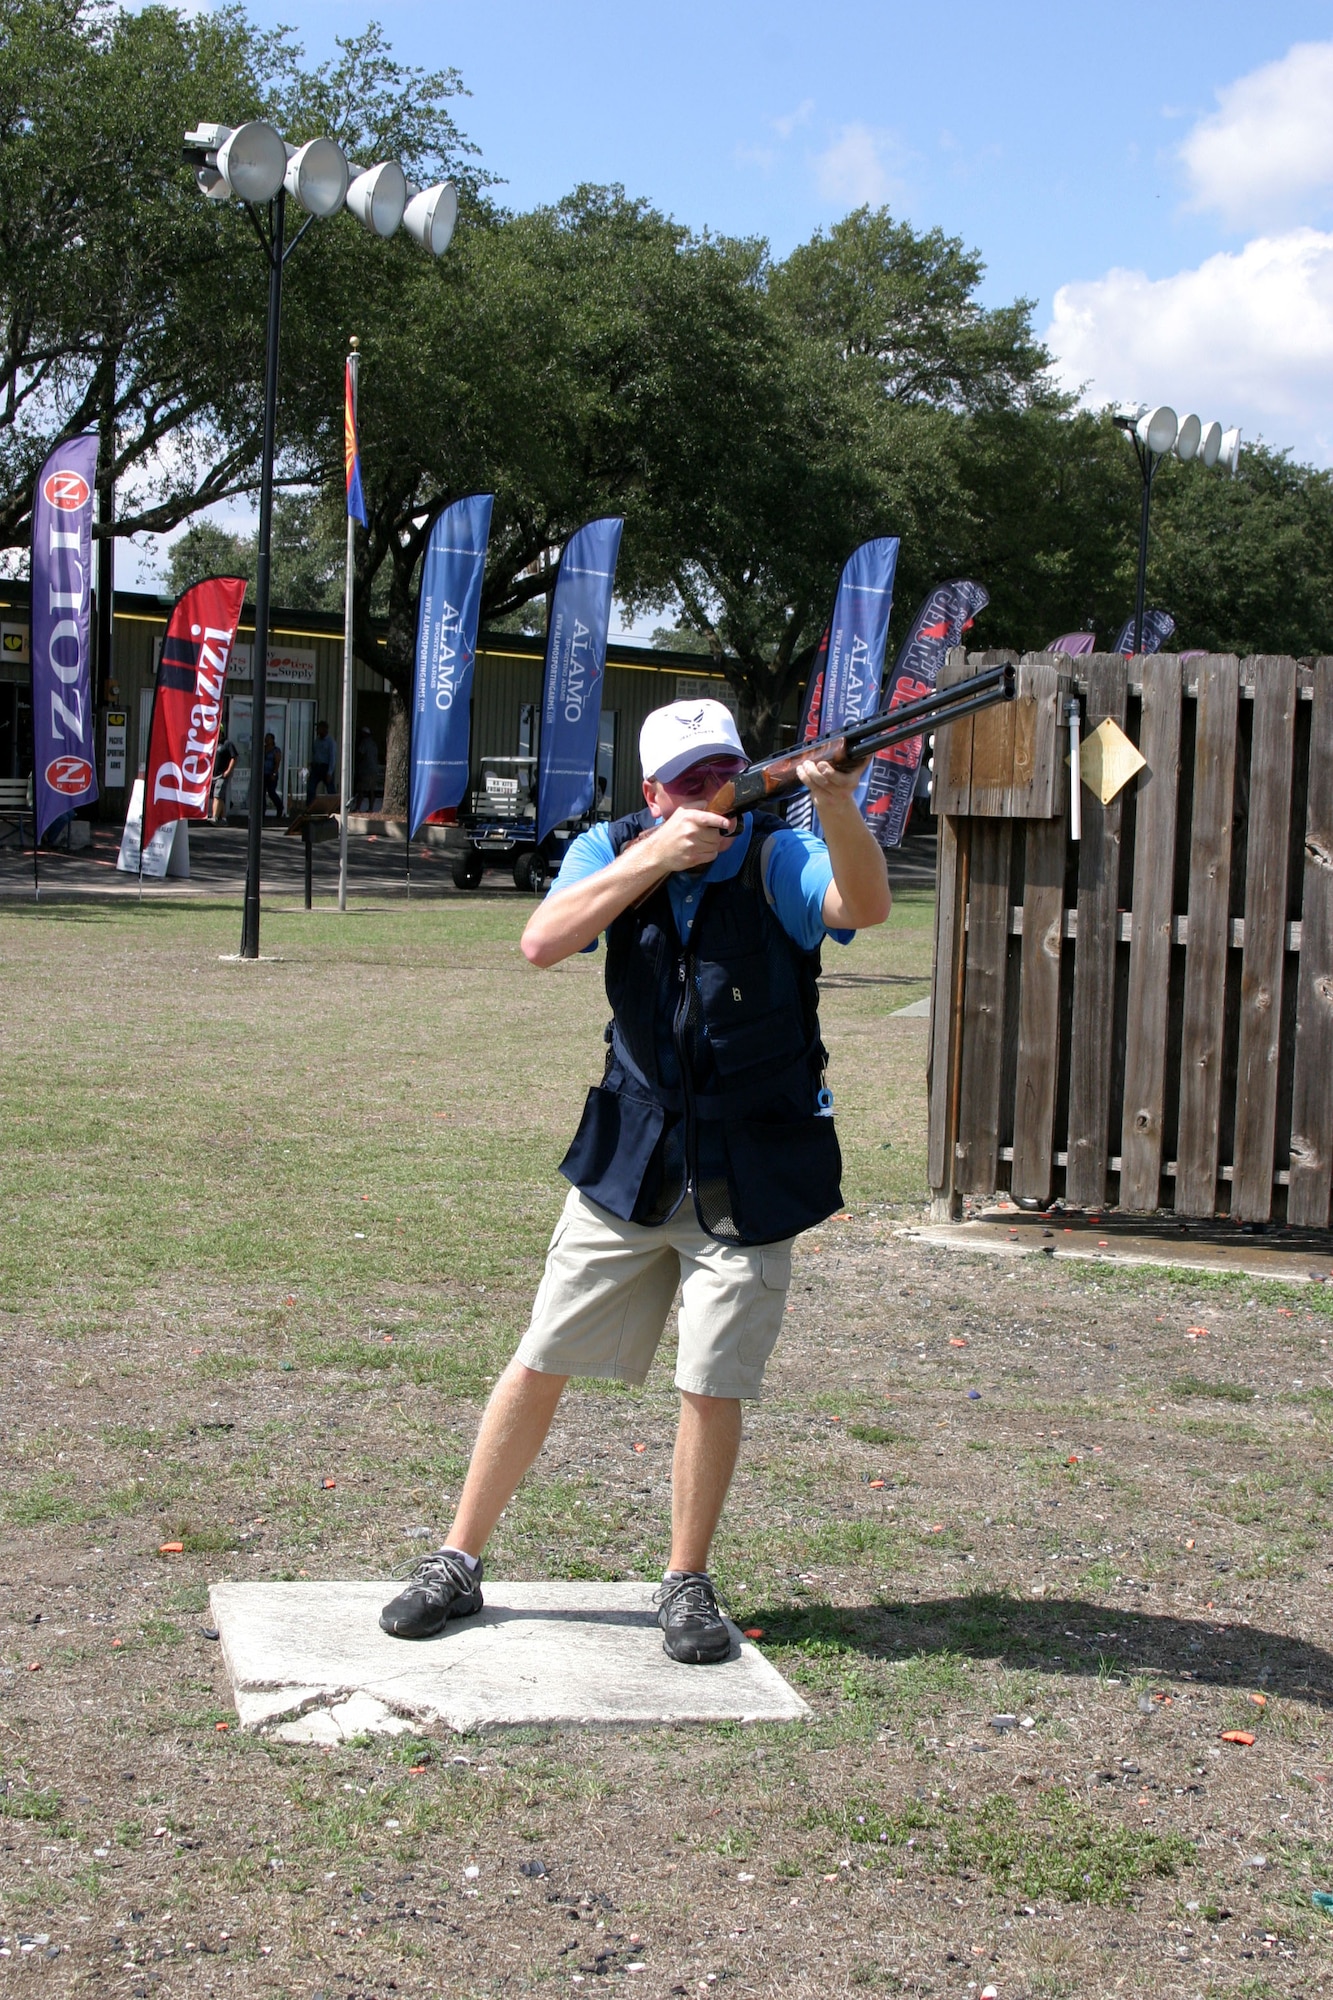 Capt. Andrew Thorsen, 28th Medical Operations Squadron general dentist, fires at targets during the 2014 World Skeet Championship at the National Shooting Complex, San Antonio, Texas, Sept. 26, 2014. Thorsen participated as a member of the Air Force skeet team and won World Military Champion in the 28-gauge event. (Courtesy photo)